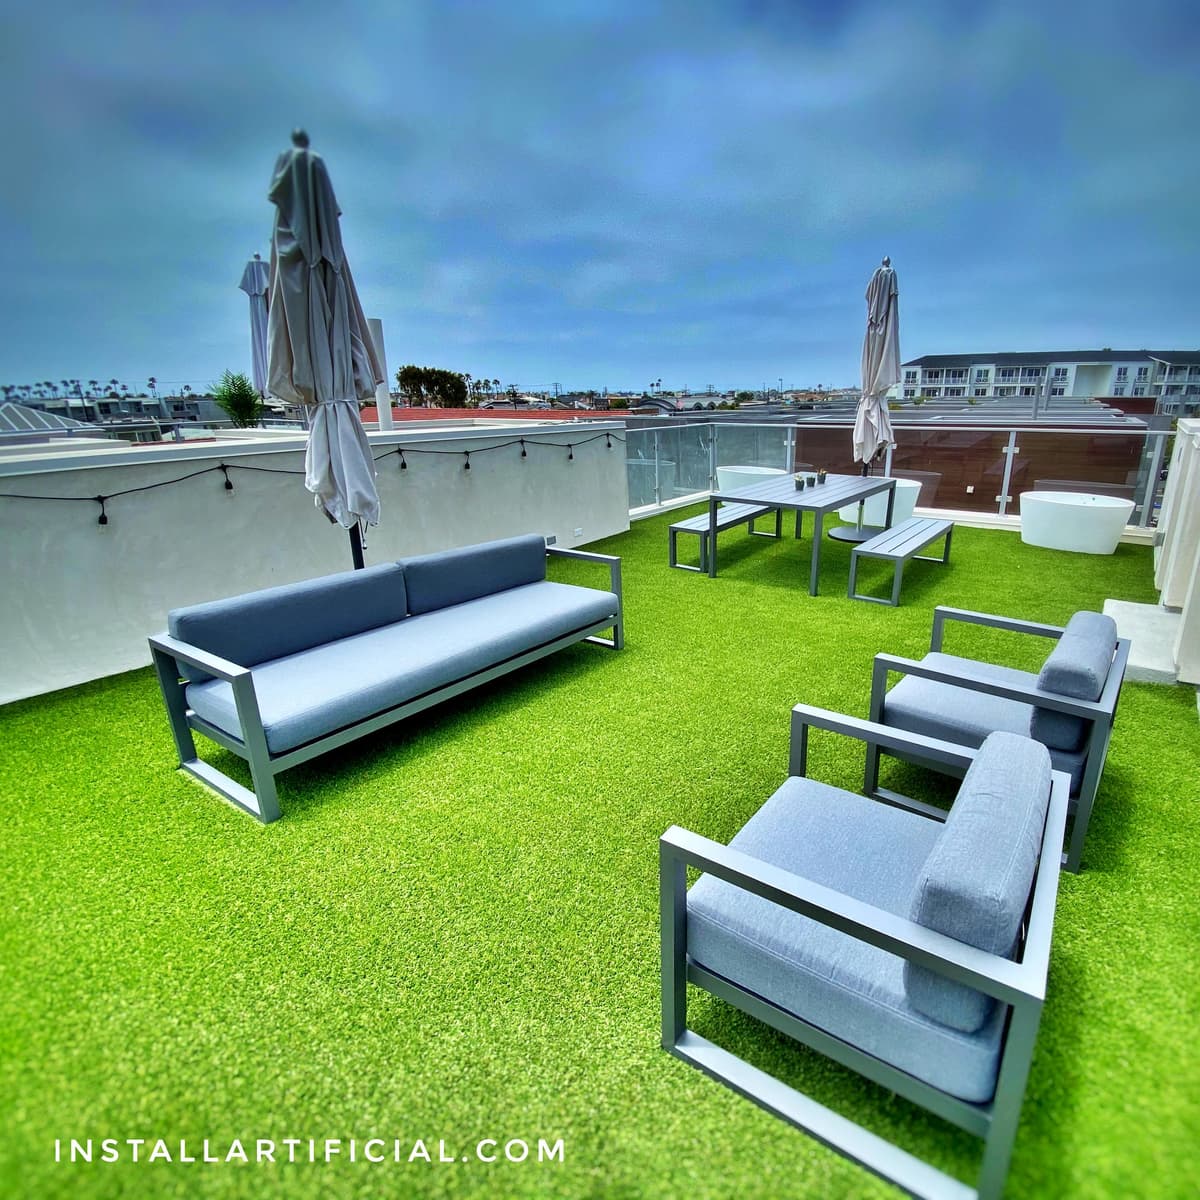 Converted rooftop into patio with artificial grass, residential